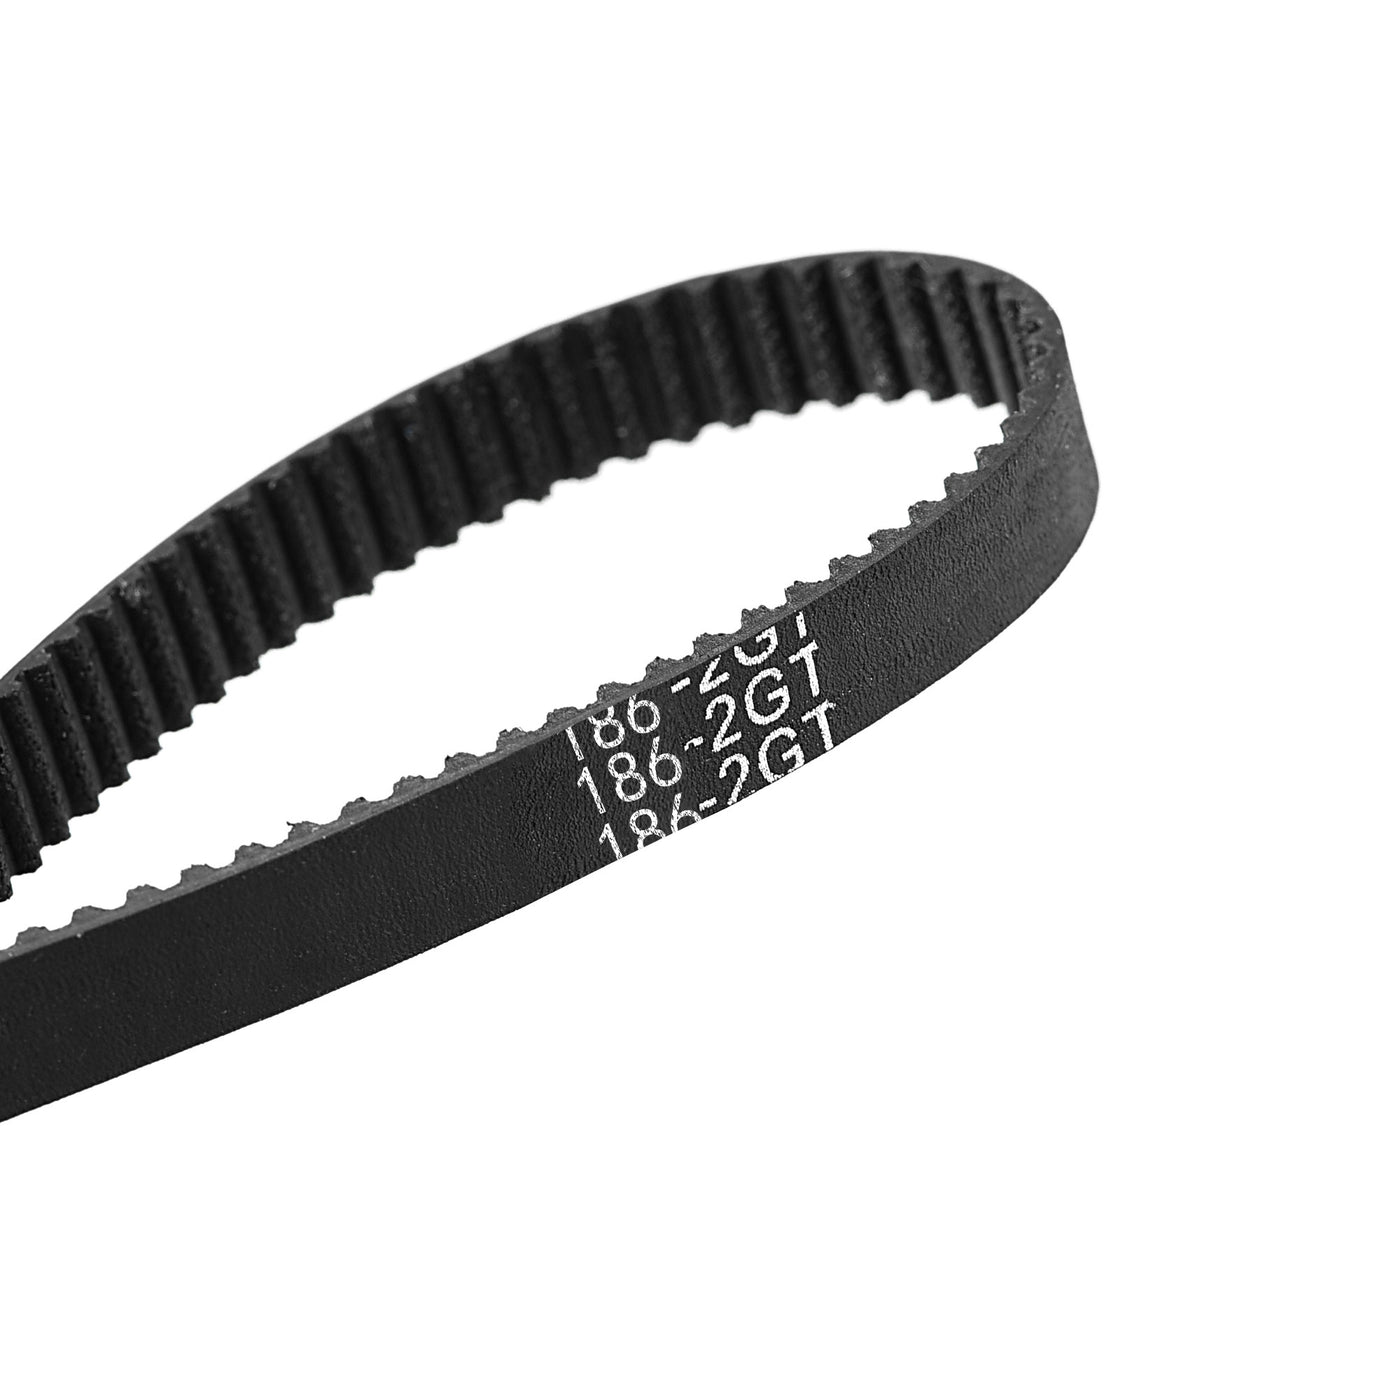 uxcell Uxcell Timing Belt 186mm Circumference 6mm Width Closed for 3D Printer